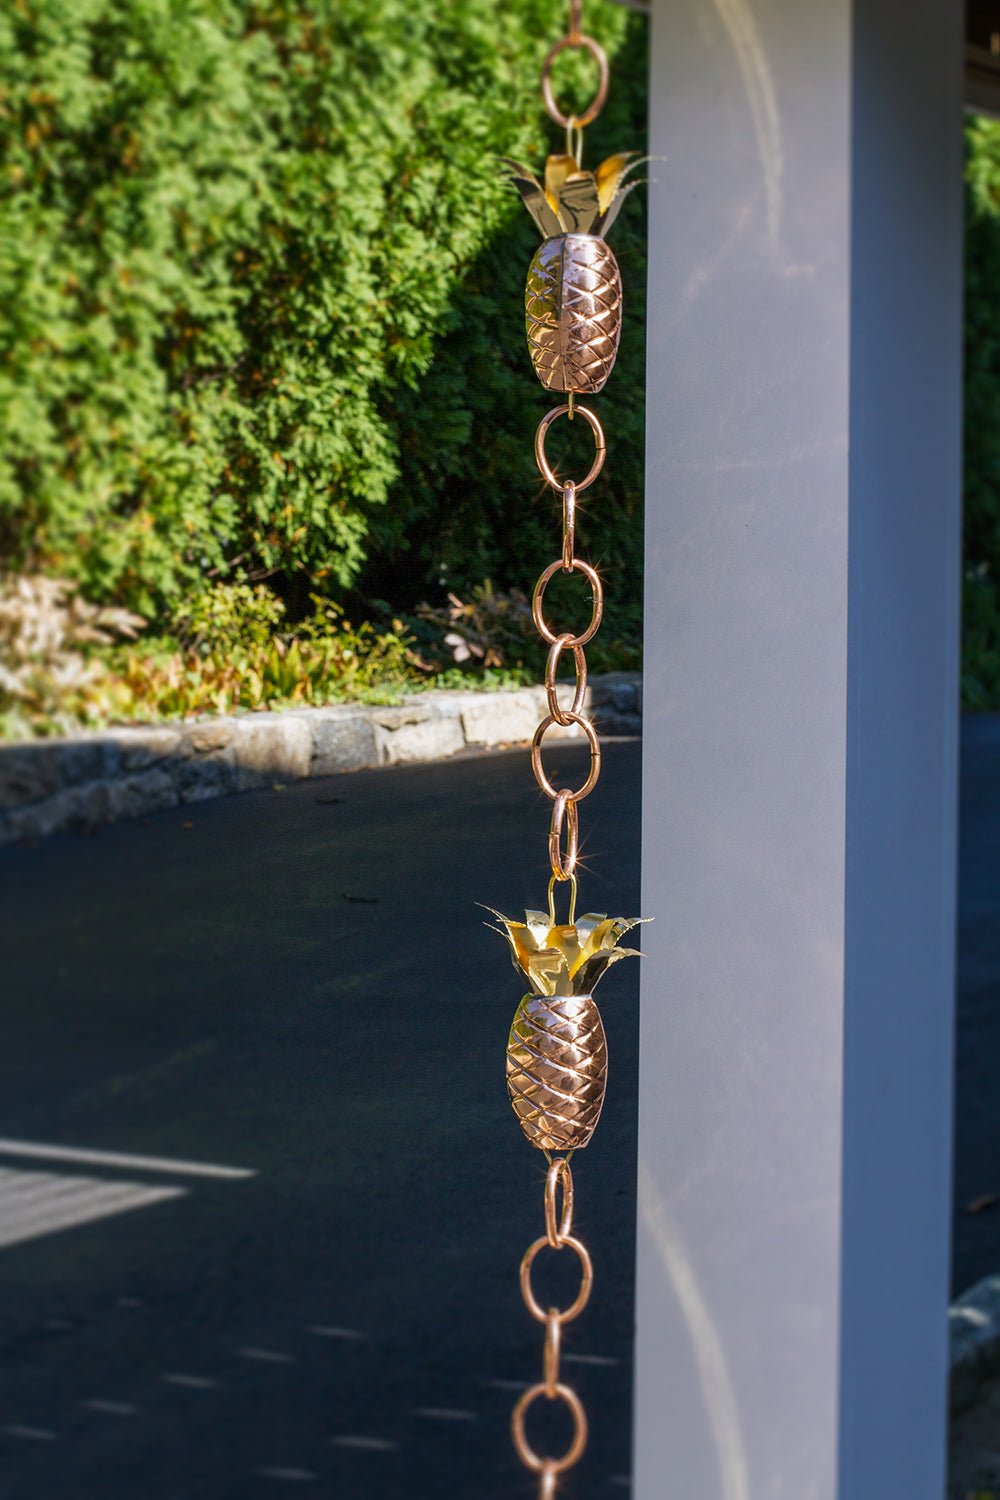 Pineapple Rain Chain - 8.5 ft., with 4 Large Figures - Good Directions